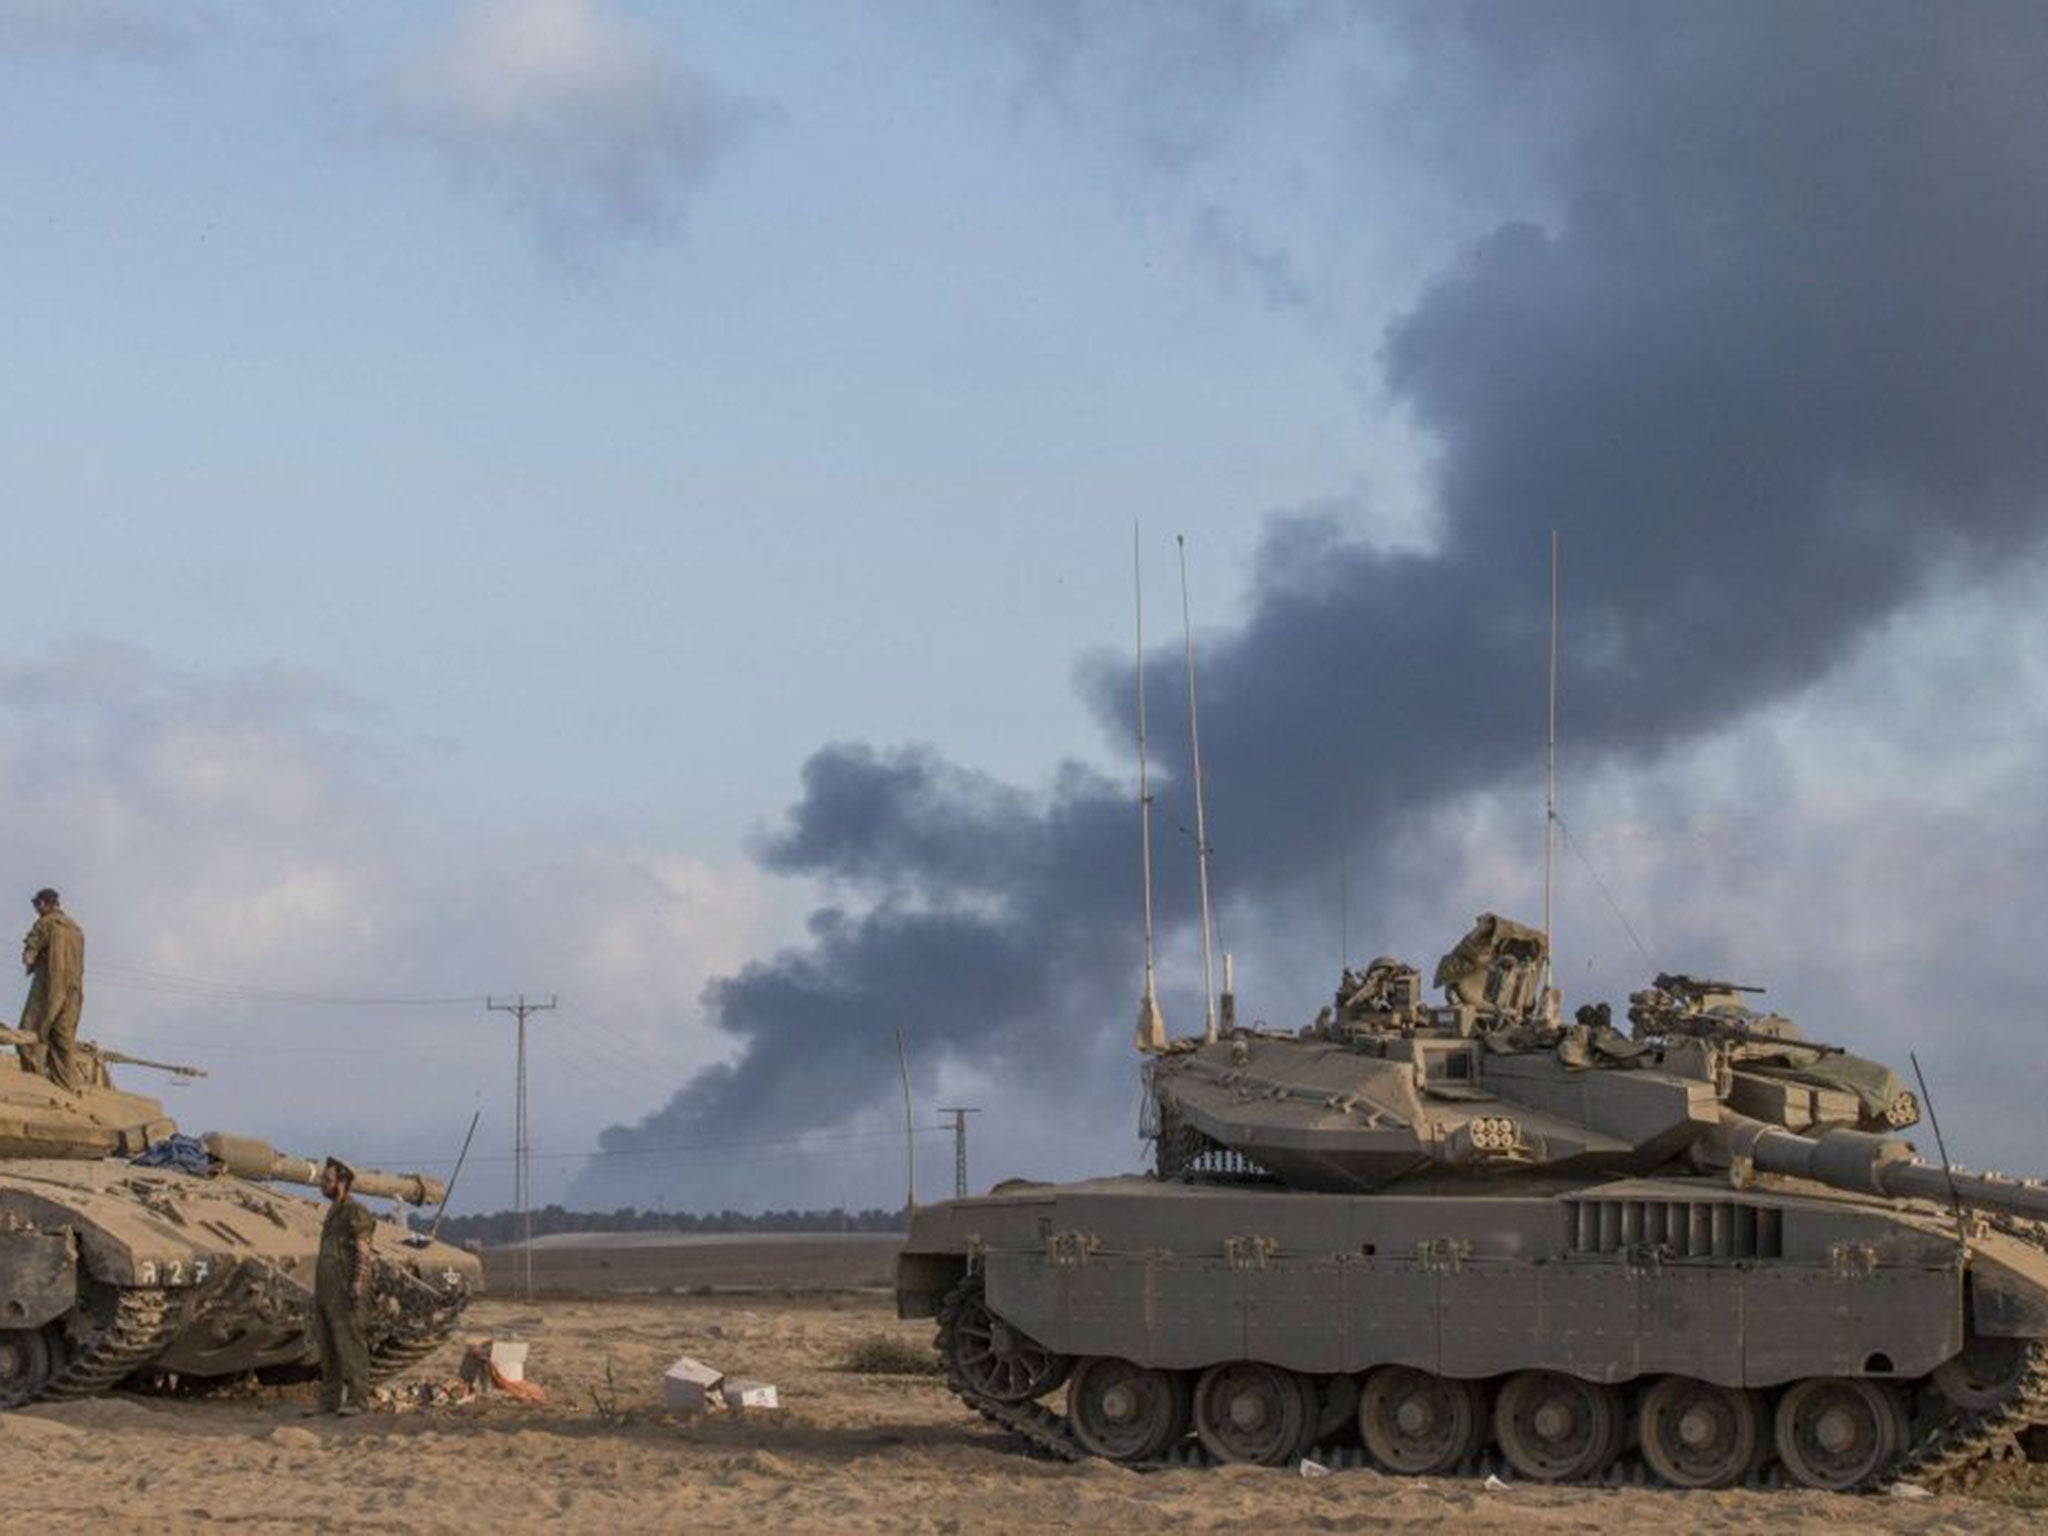 Israeli Merkava tanks are seen at an army deployment area near the border with the Gaza Strip, on July 31, 2014